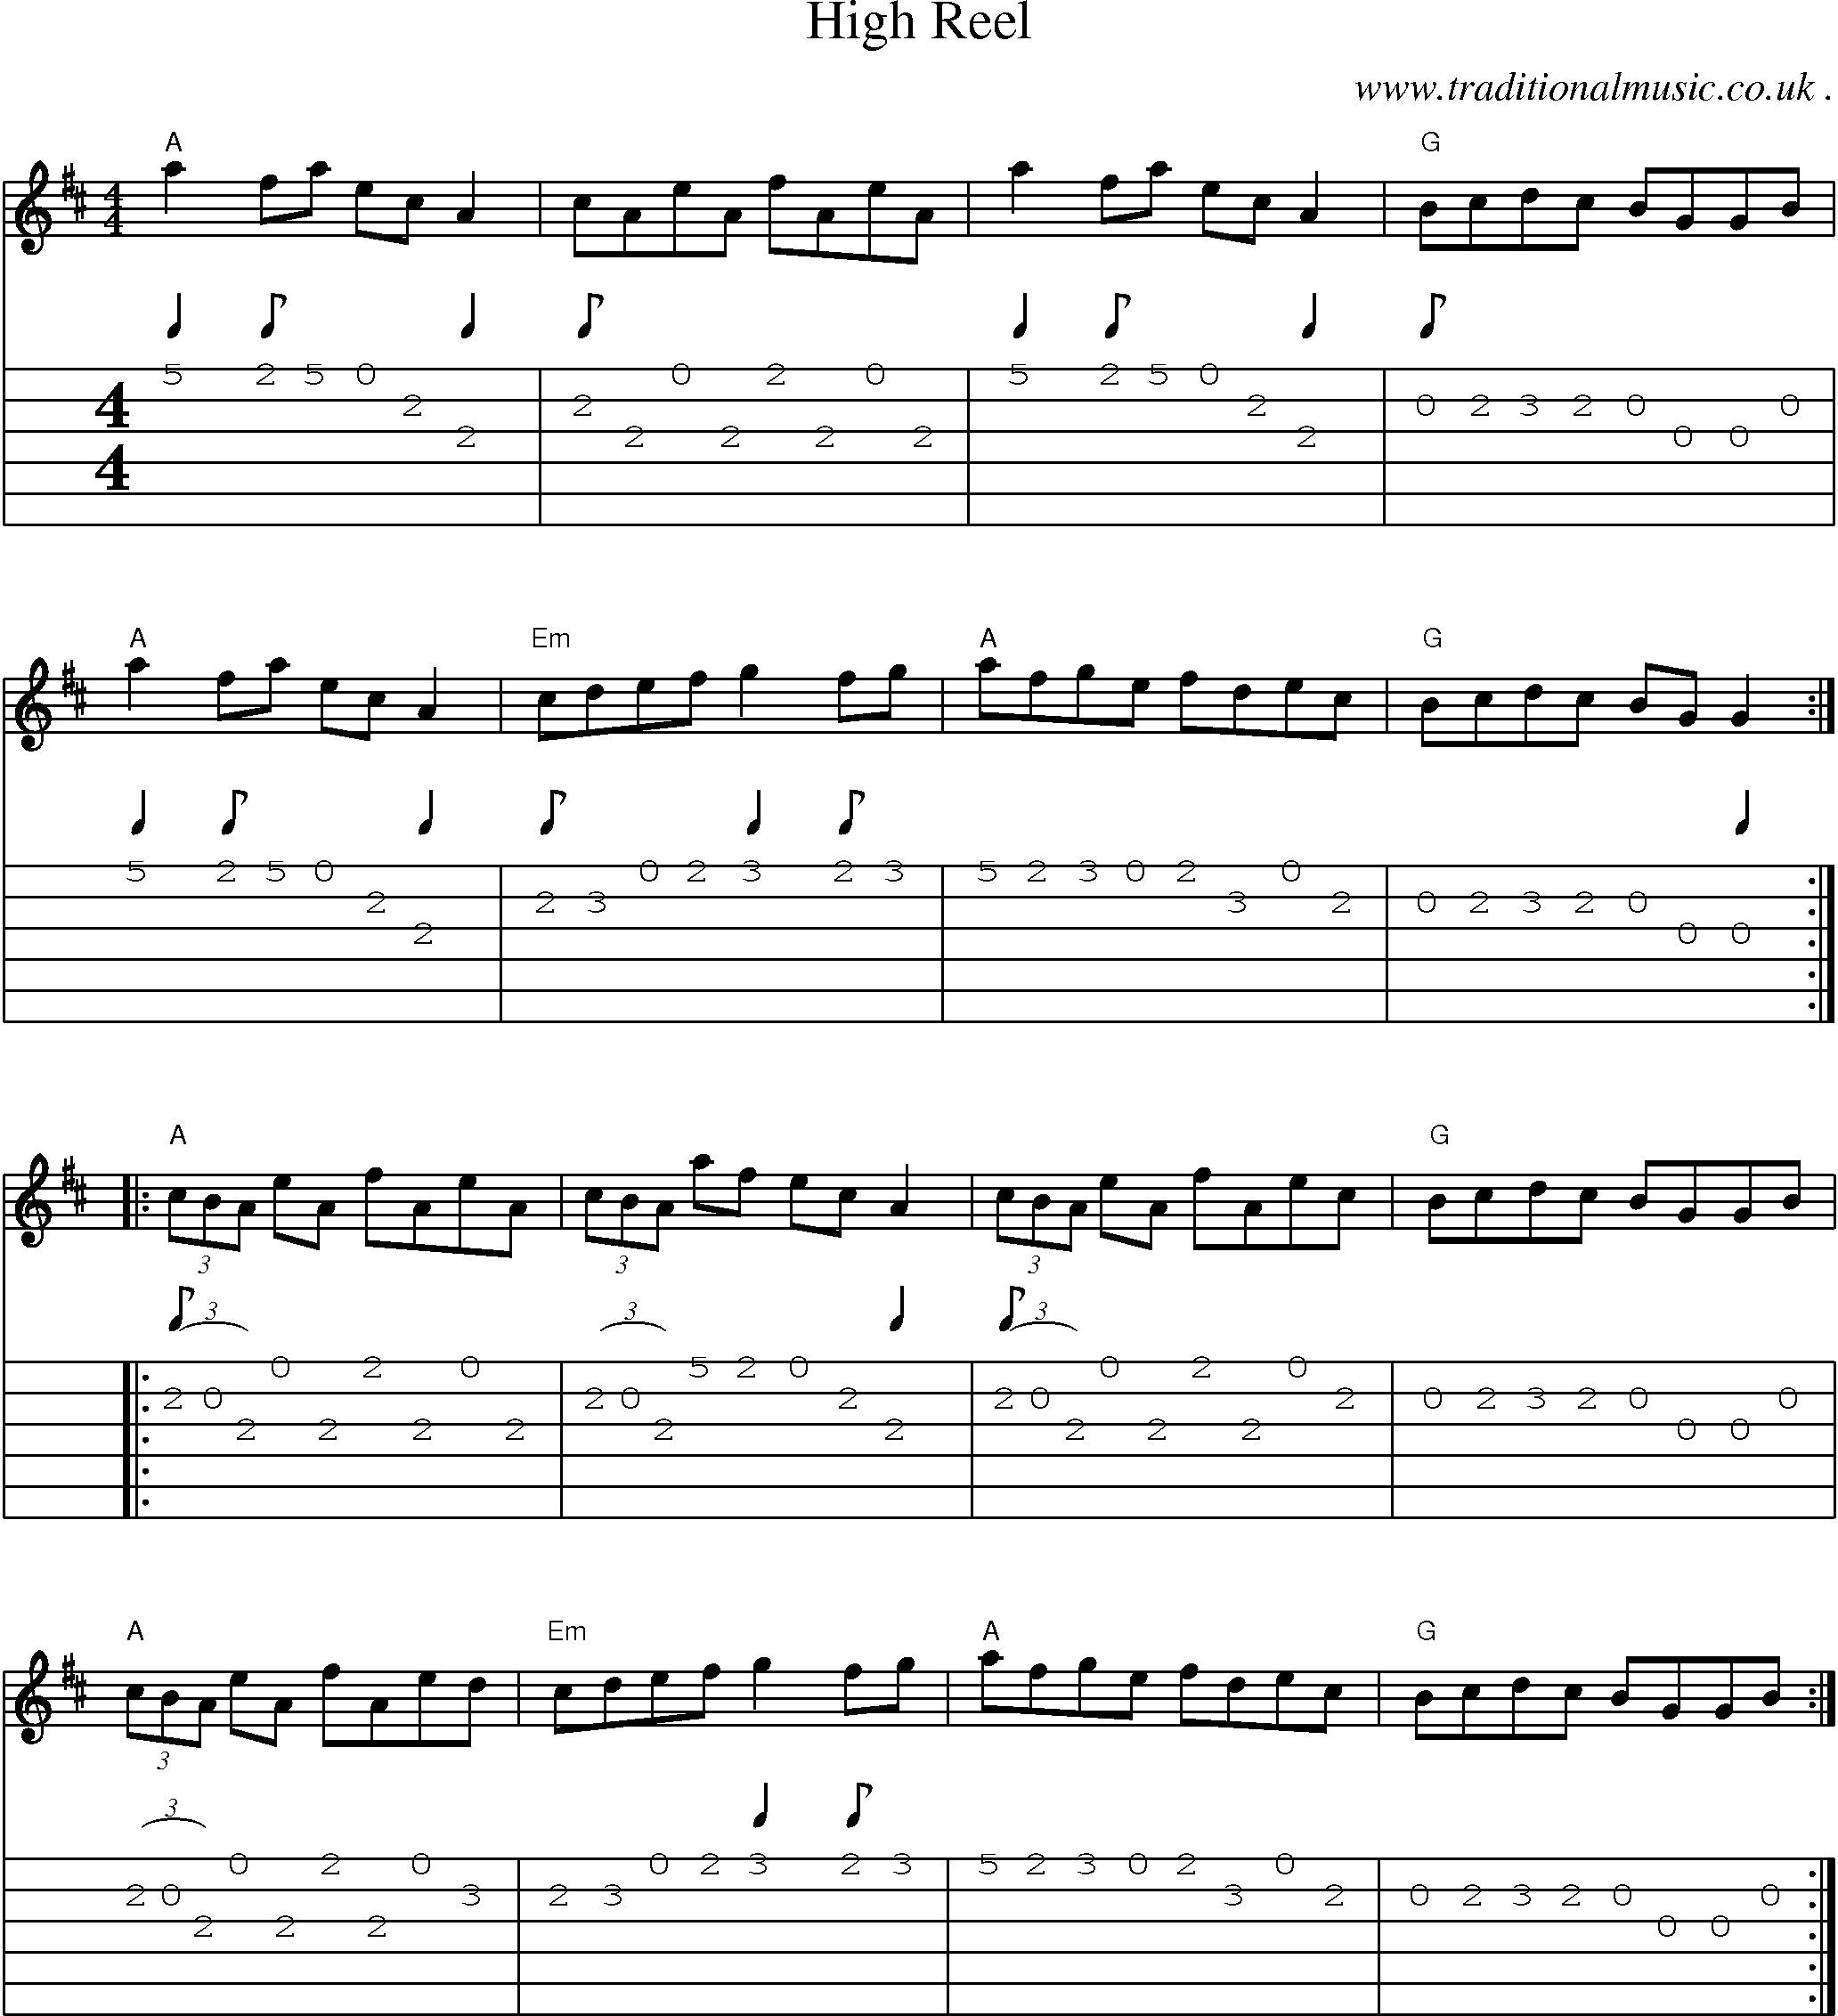 Music Score and Guitar Tabs for High Reel